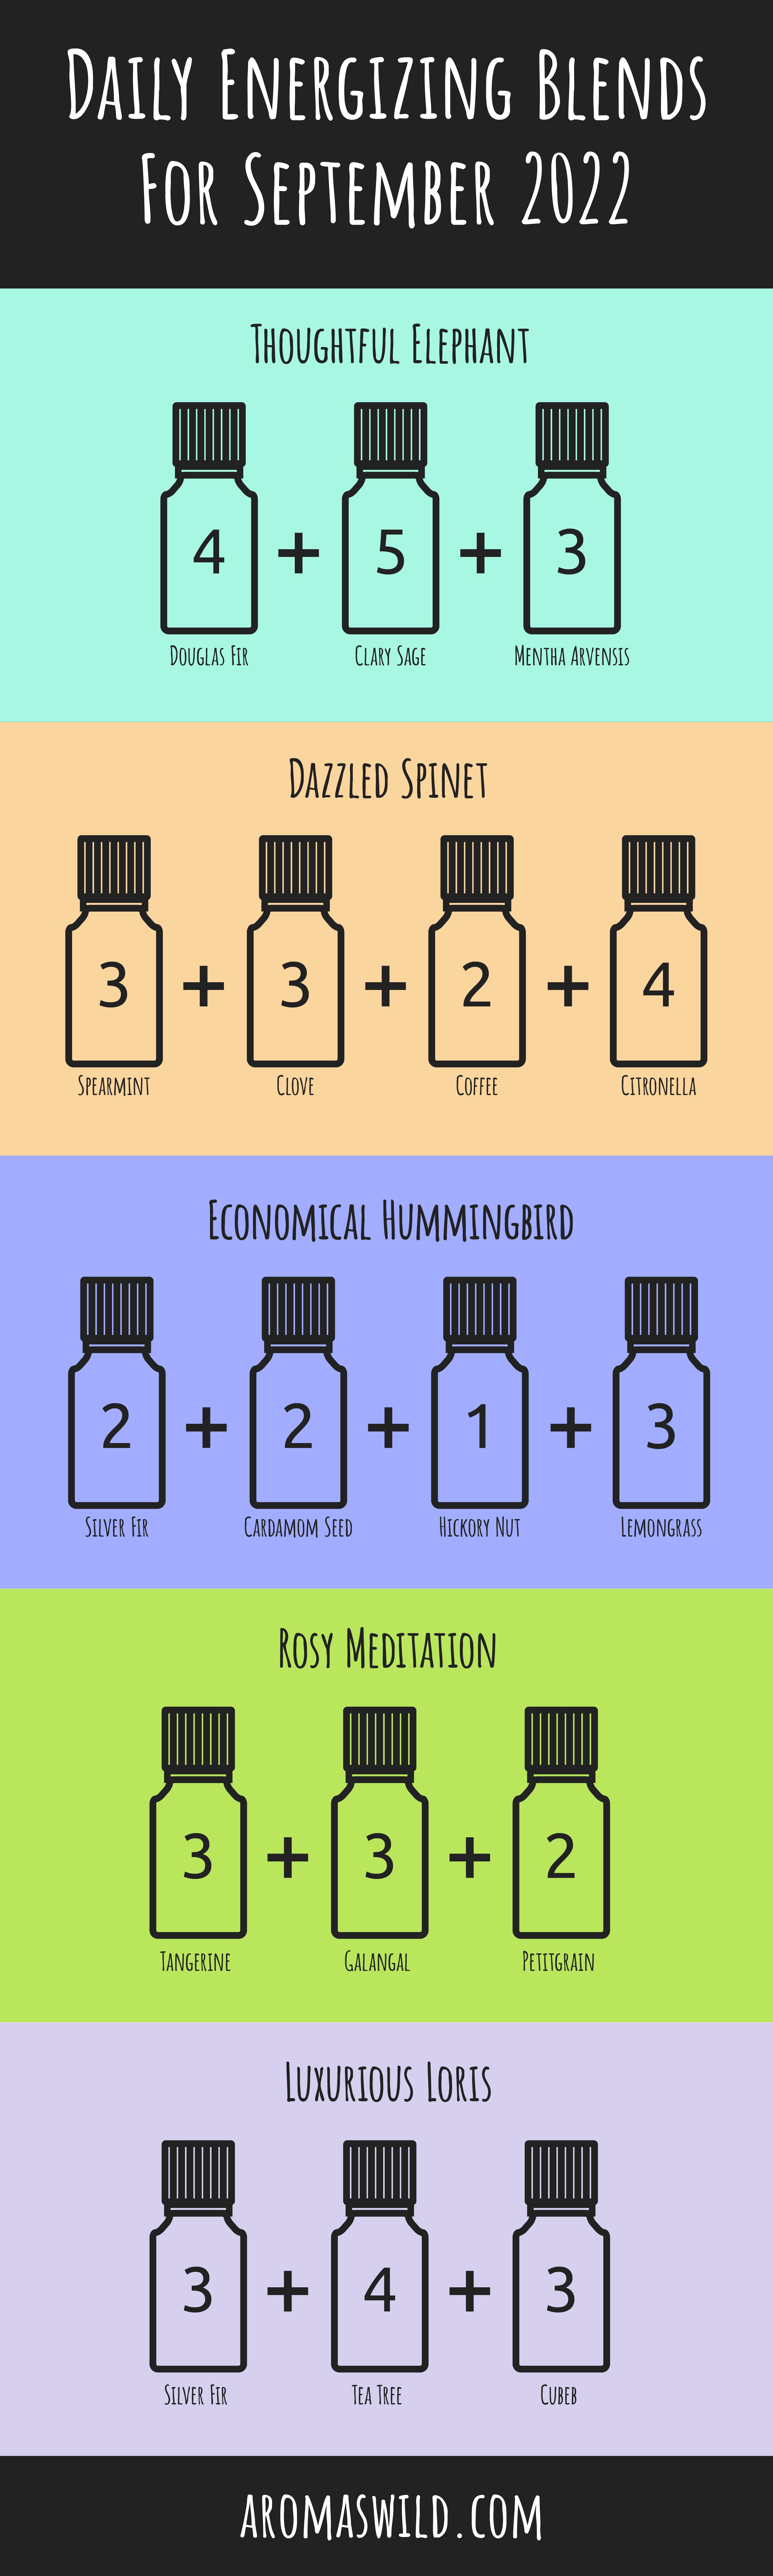 how to promote essential oils, 5 blends – Daily Energizing Blends For 10 September 2022